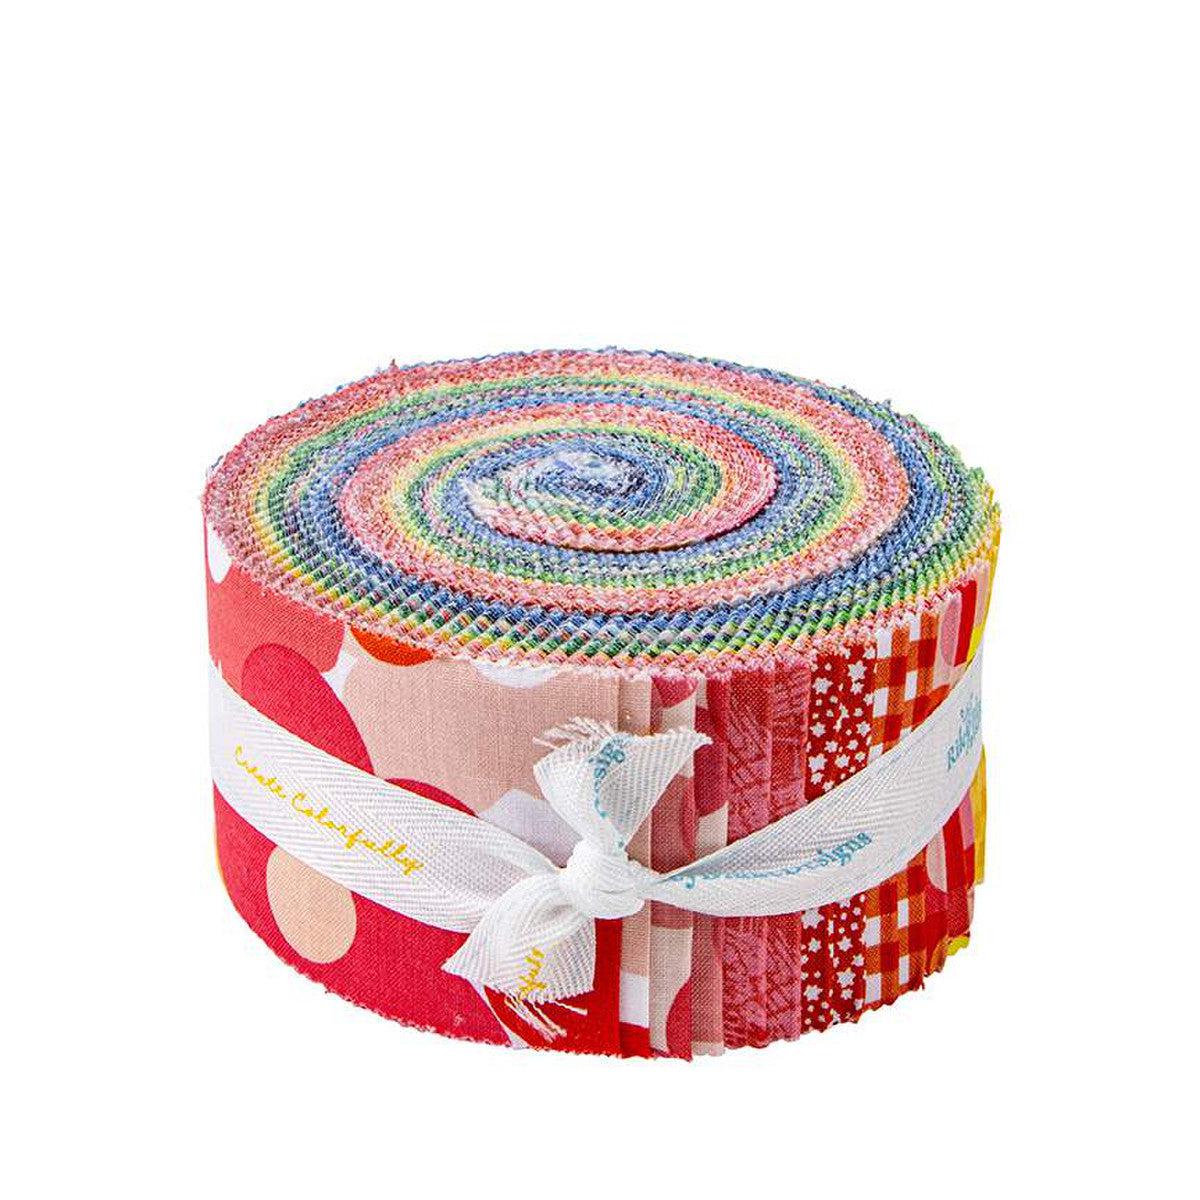 Copacetic 2 1/2" Jelly Roll